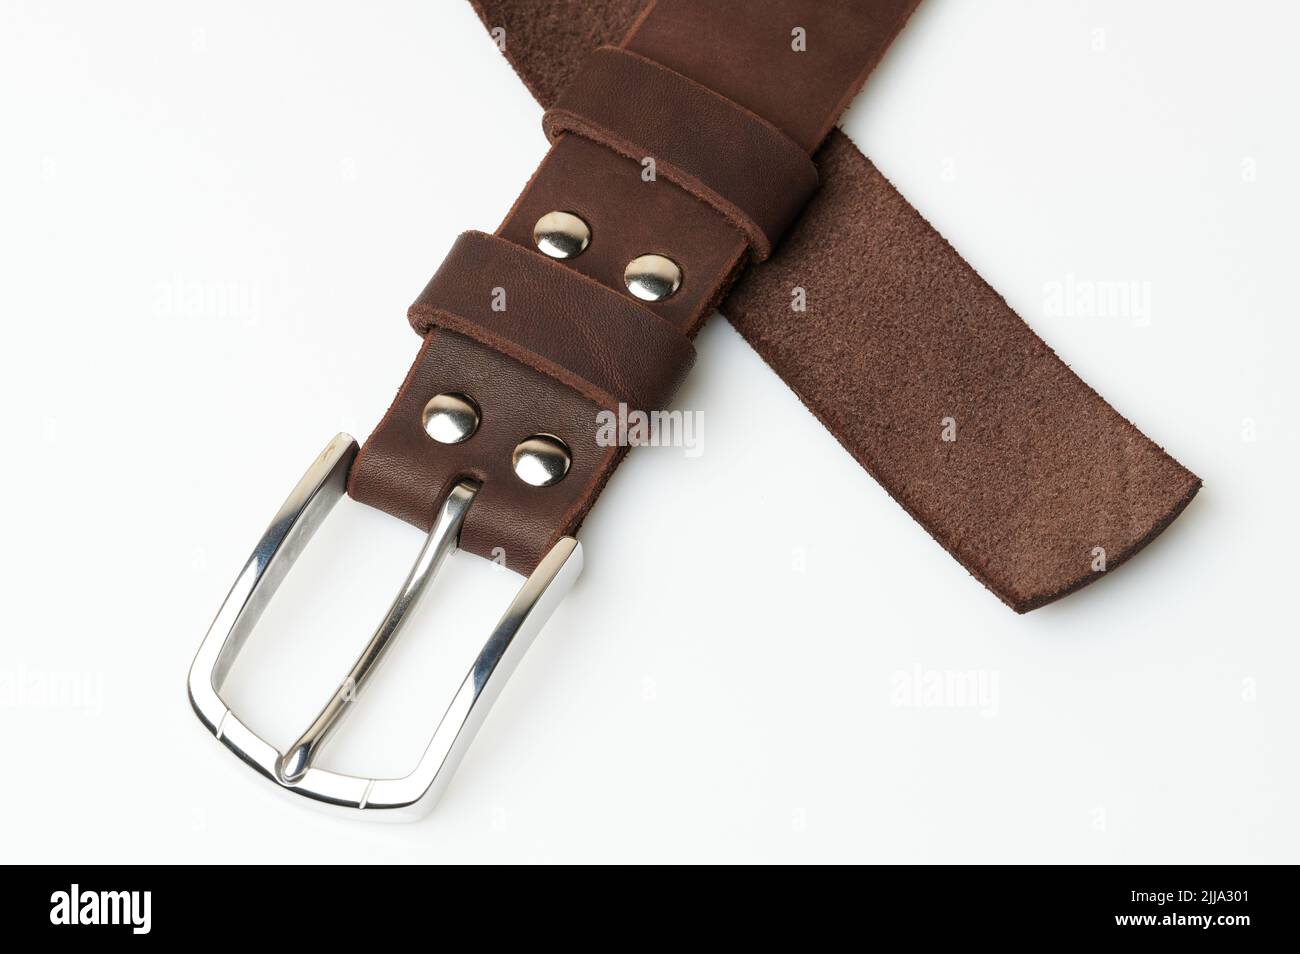 Metal shiny leather belt waistband close up view isolated Stock Photo